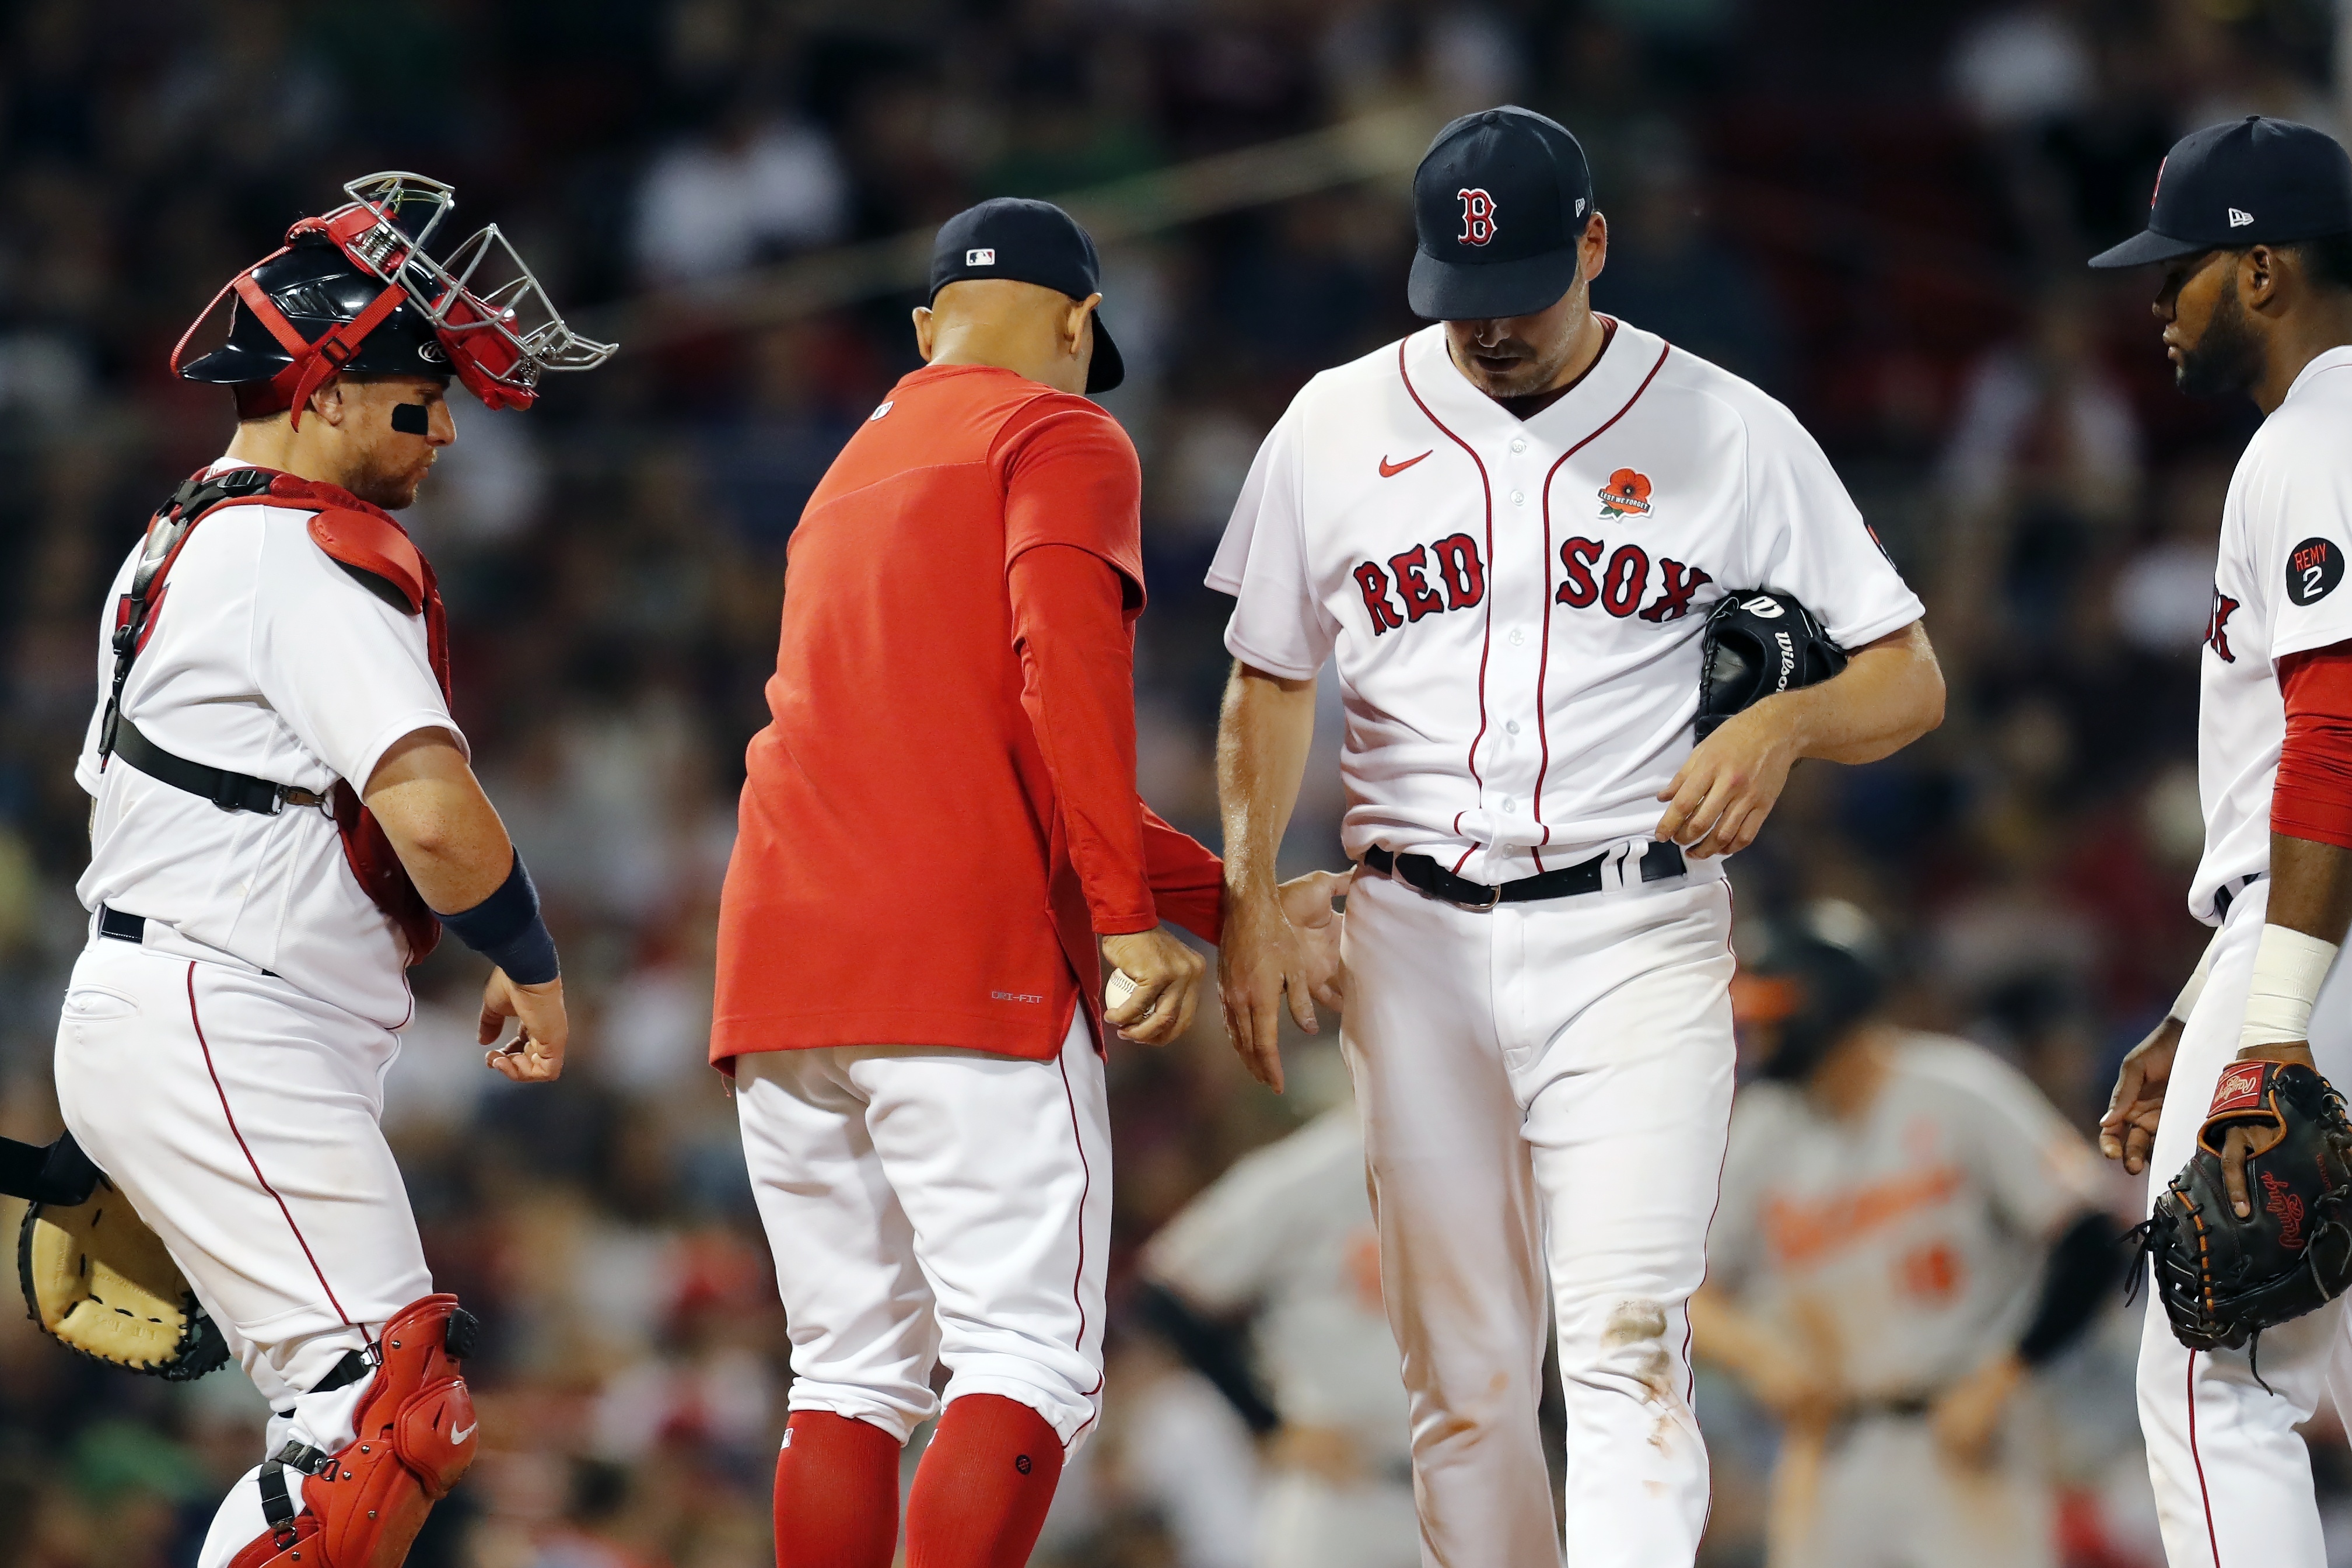 RED SOX 7, A'S 3: Boston wins 8th straight for 17-2 start